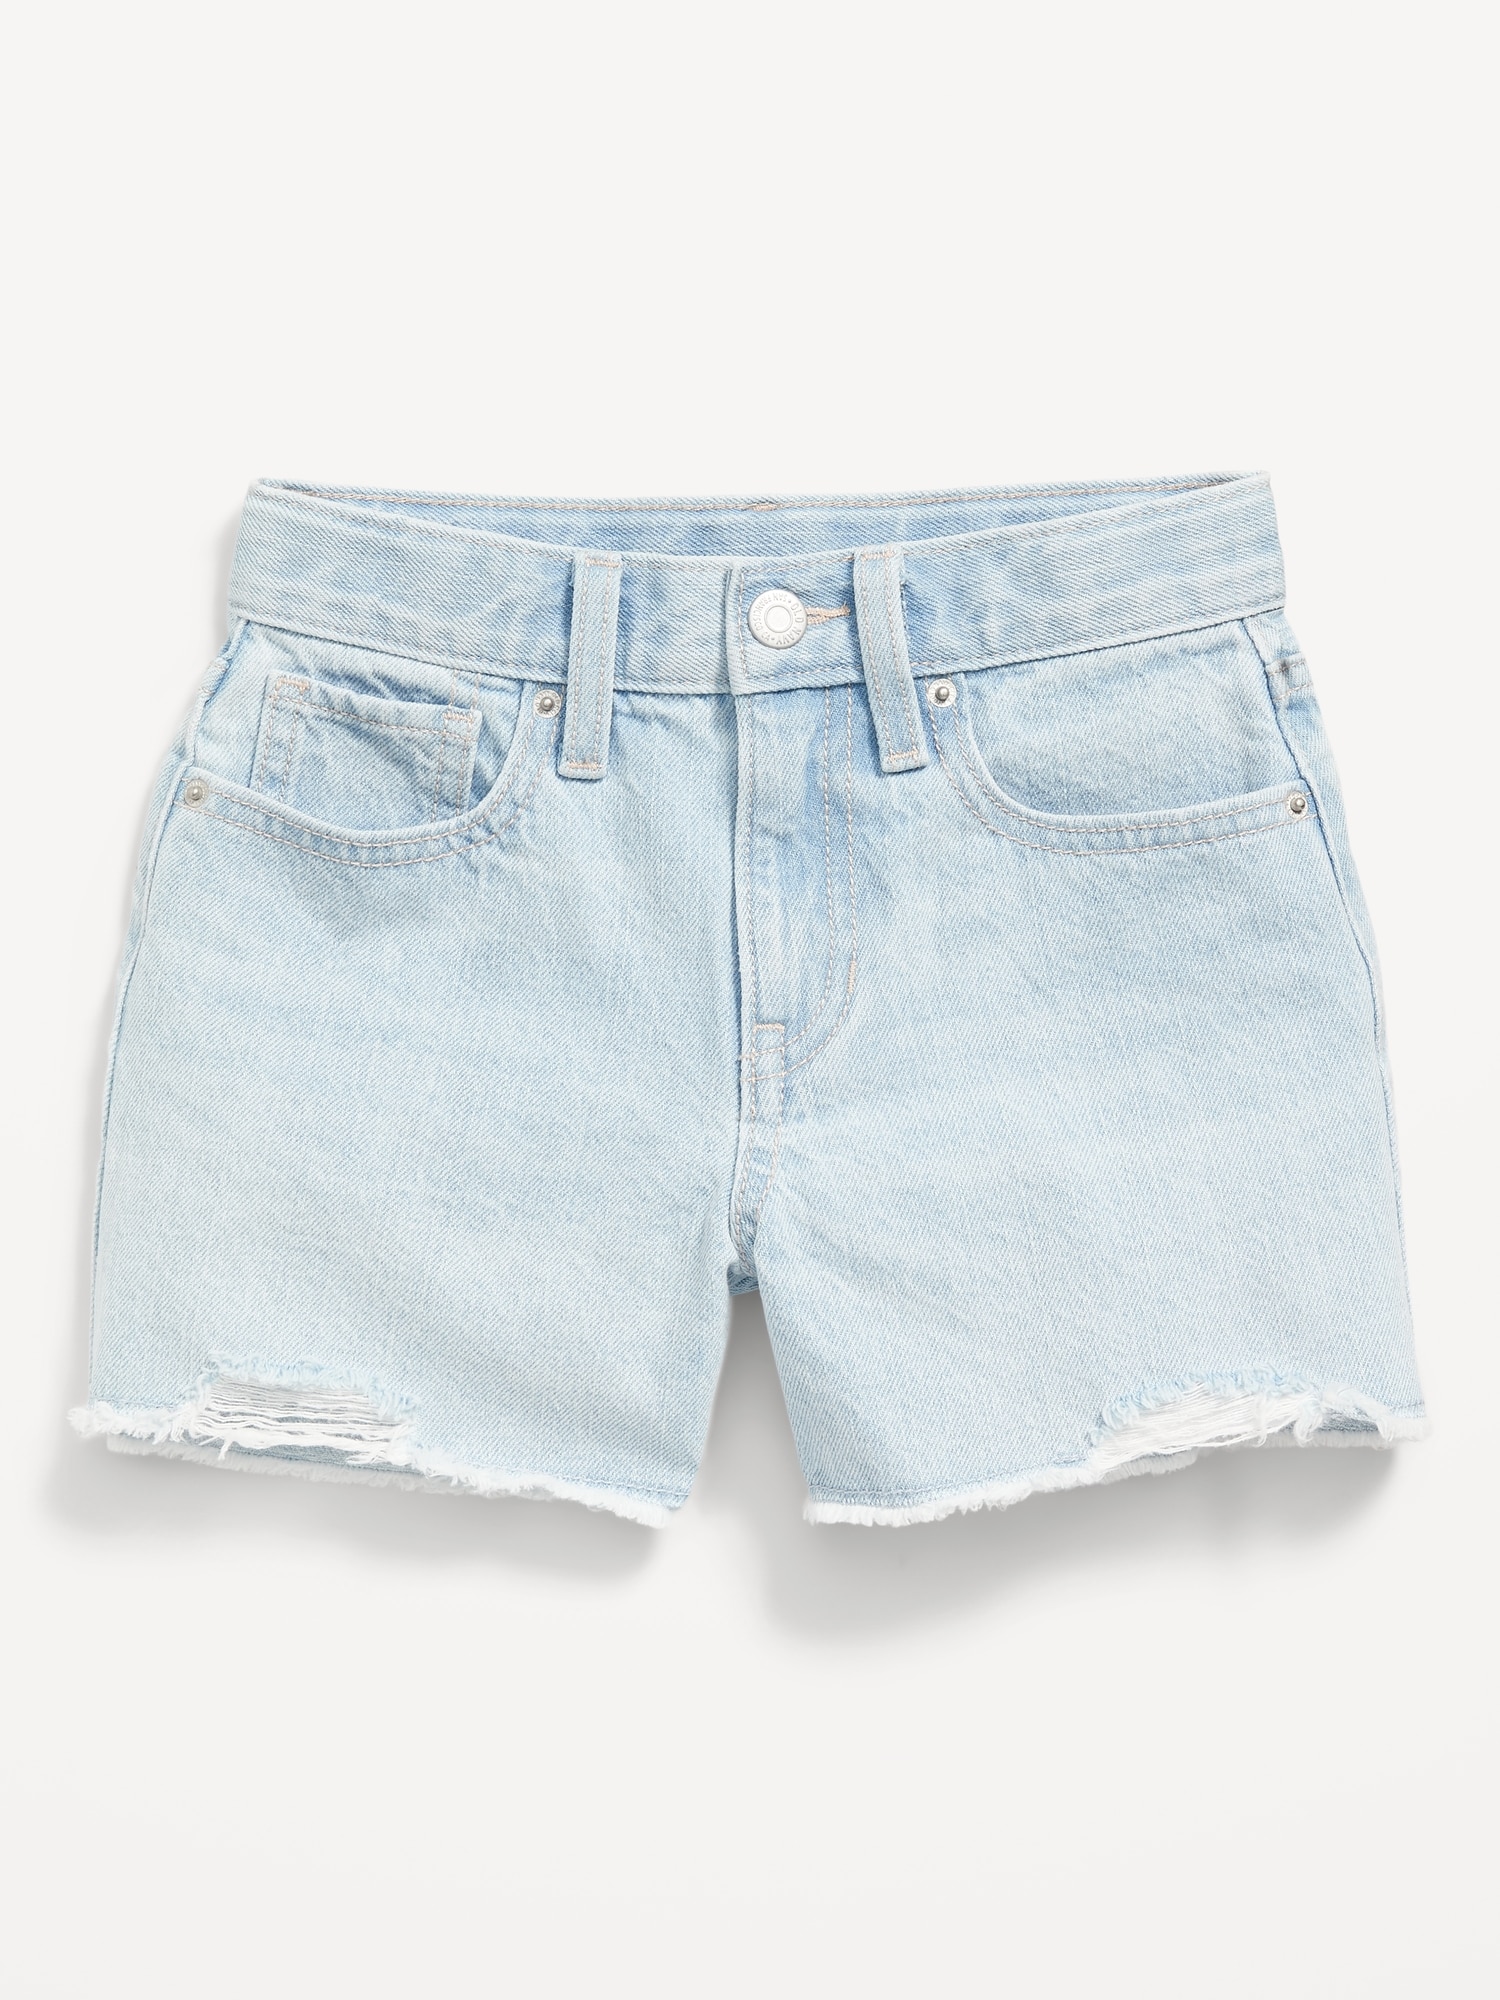 High-Waisted Light-Wash Cut-Off Jean Shorts for Girls | Old Navy